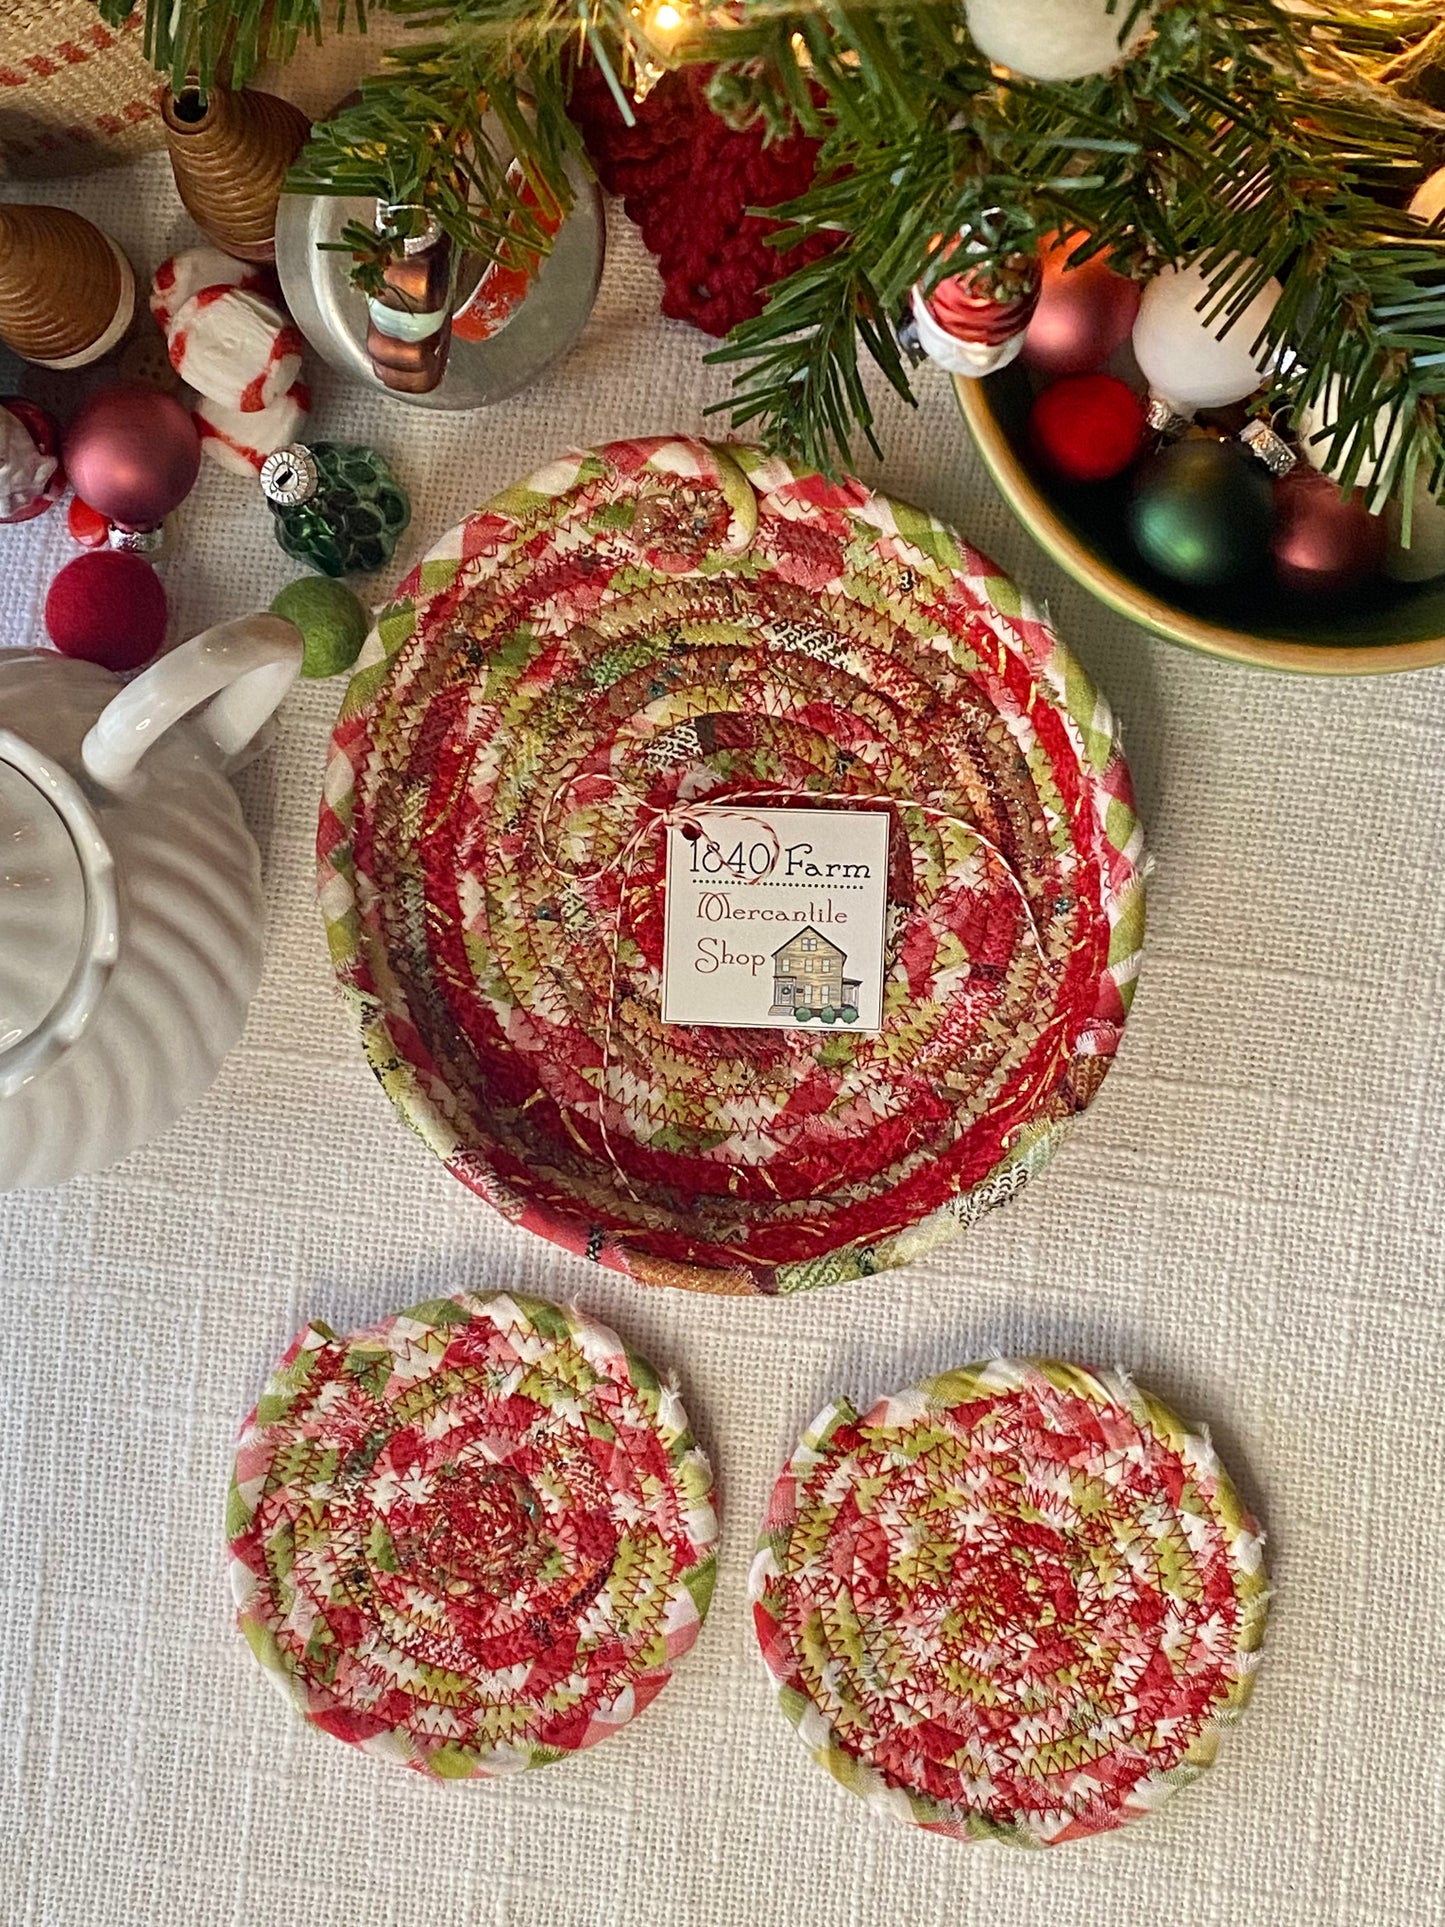 6” Medium Saucer Style Trivet and Set of Two Coasters